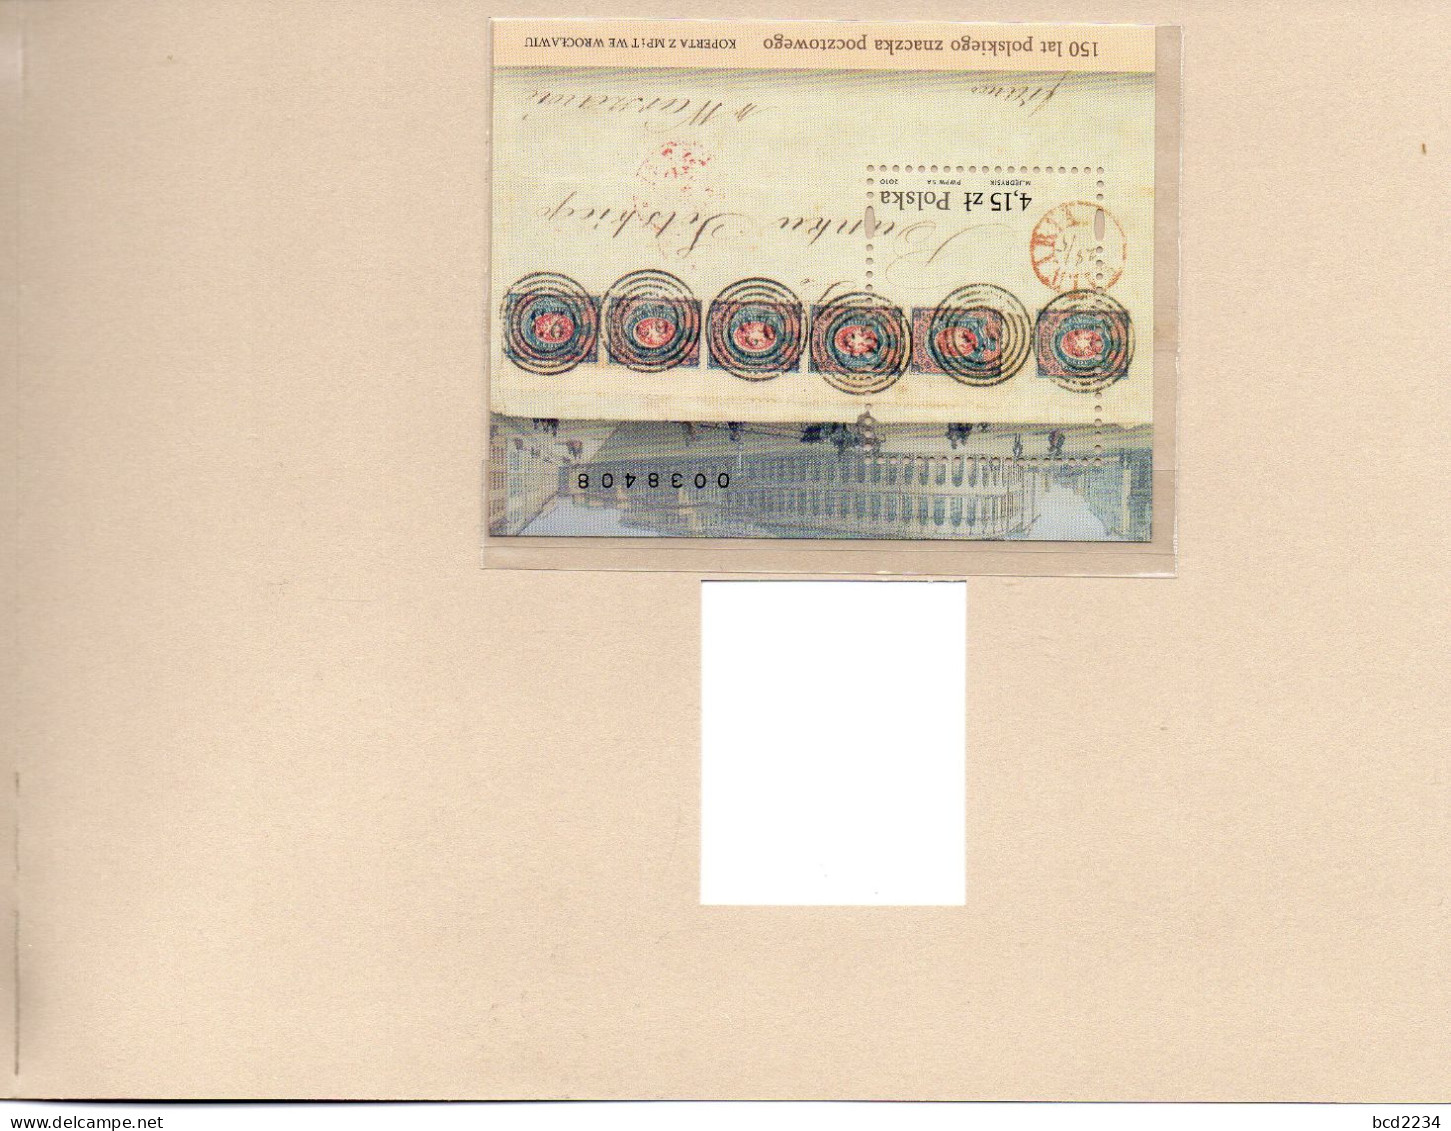 POLAND 2010 POLISH POST OFFICE LIMITED EDITION FOLDER: 150 YEARS ANNIVERSARY 1860 FIRST POLISH STAMP FDC & MS & ENVELOPE - Lettres & Documents